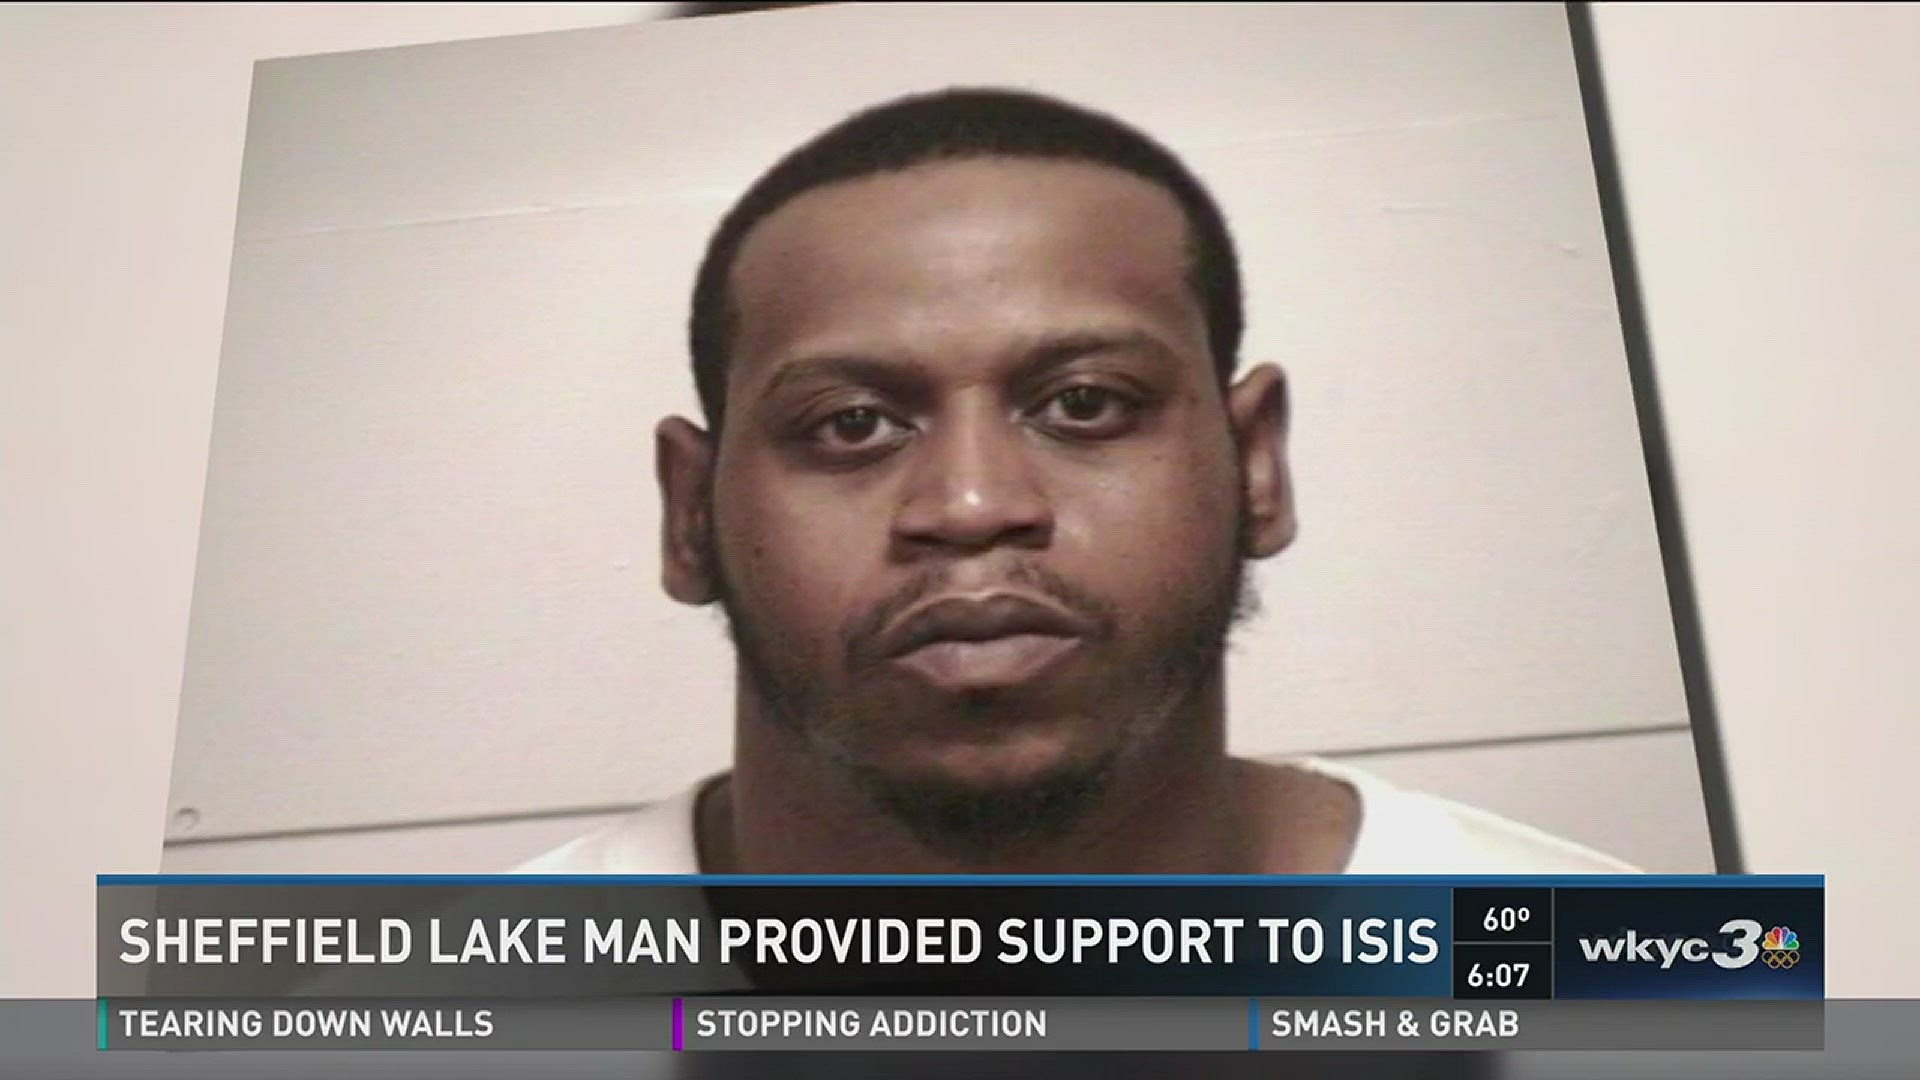 Sheffield Lake man provided ISIS support